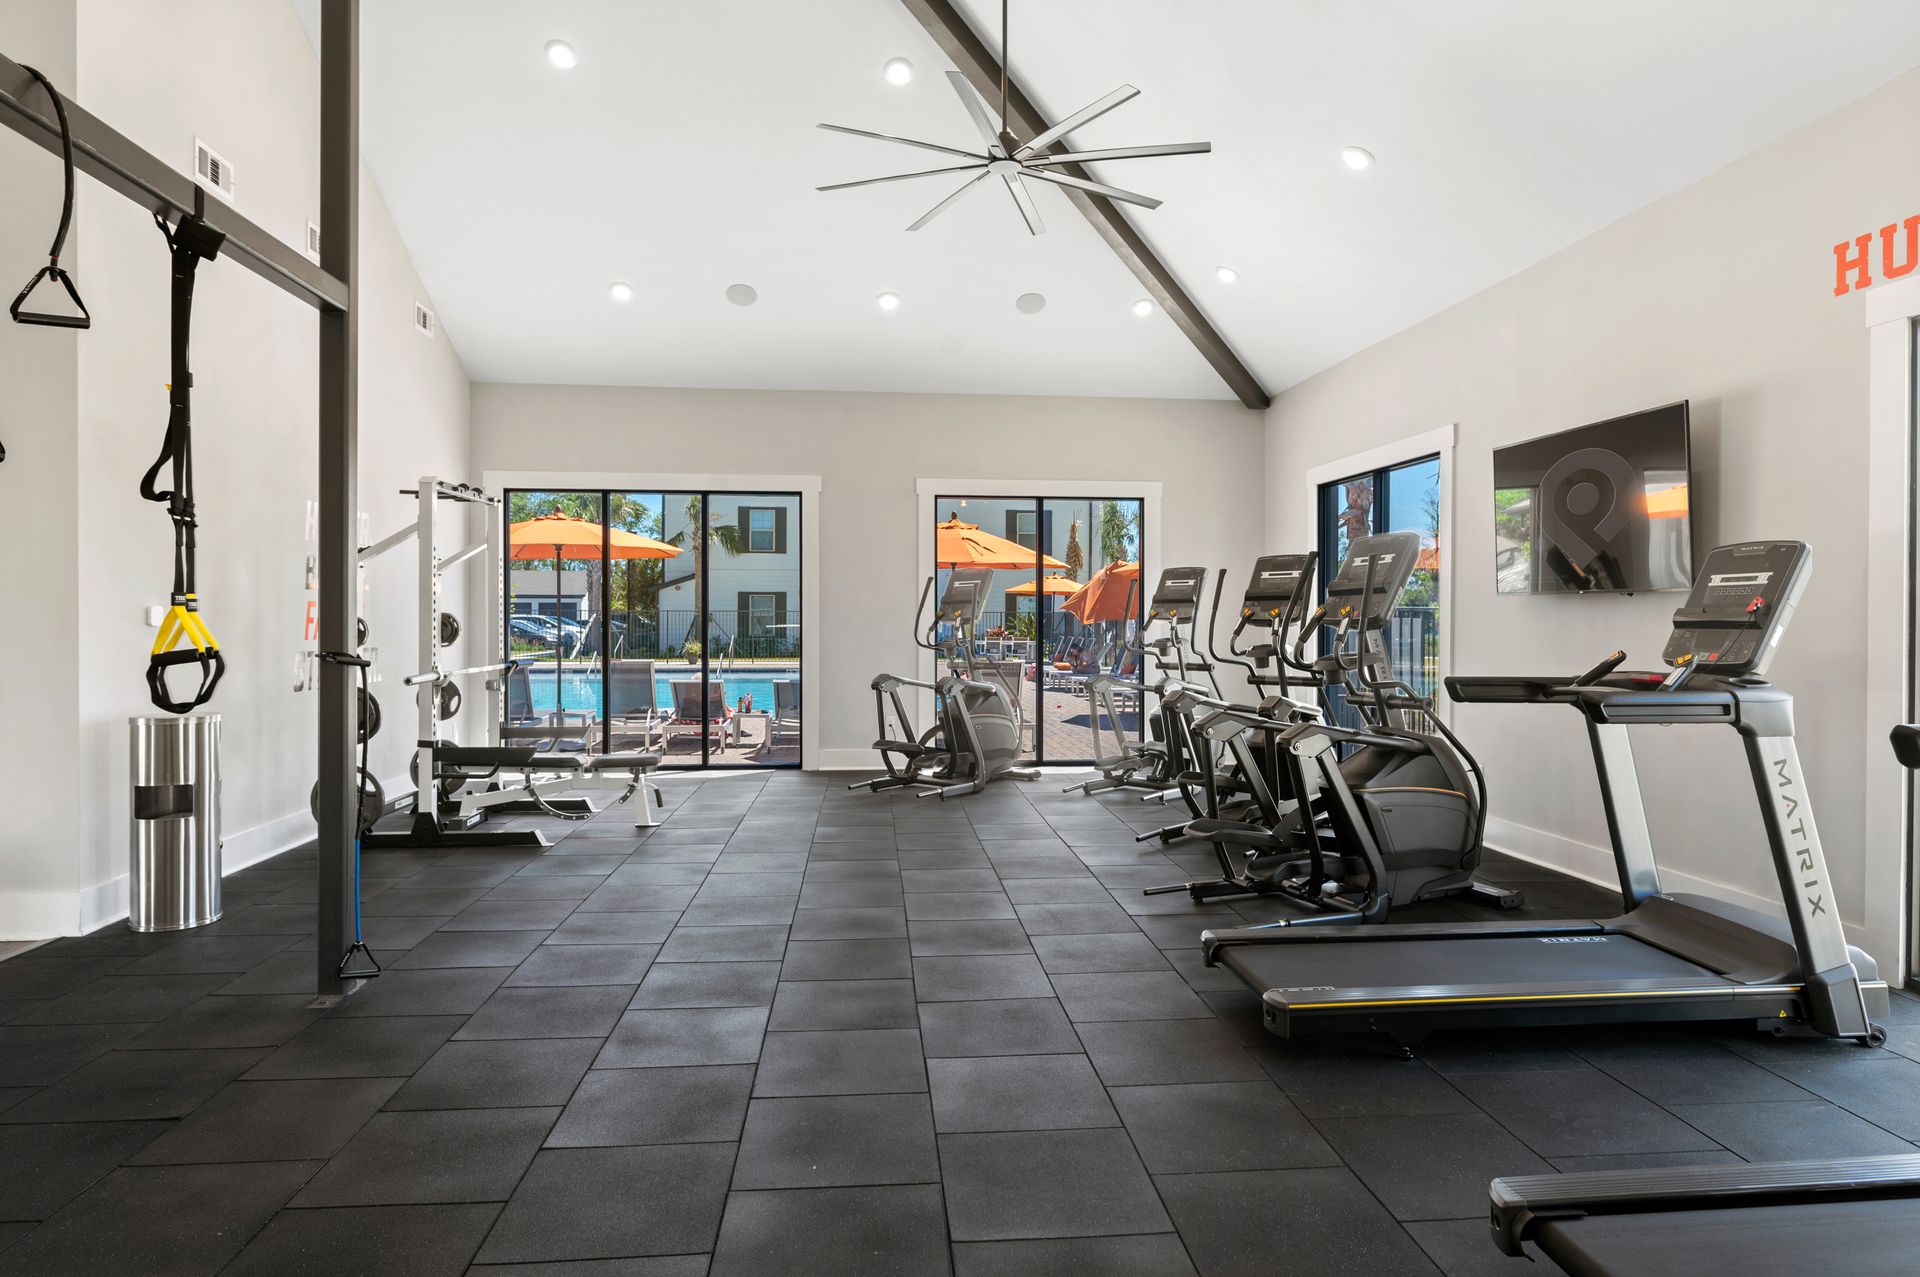 Apartment gym with treadmills, exercise bikes, and a ceiling fan.